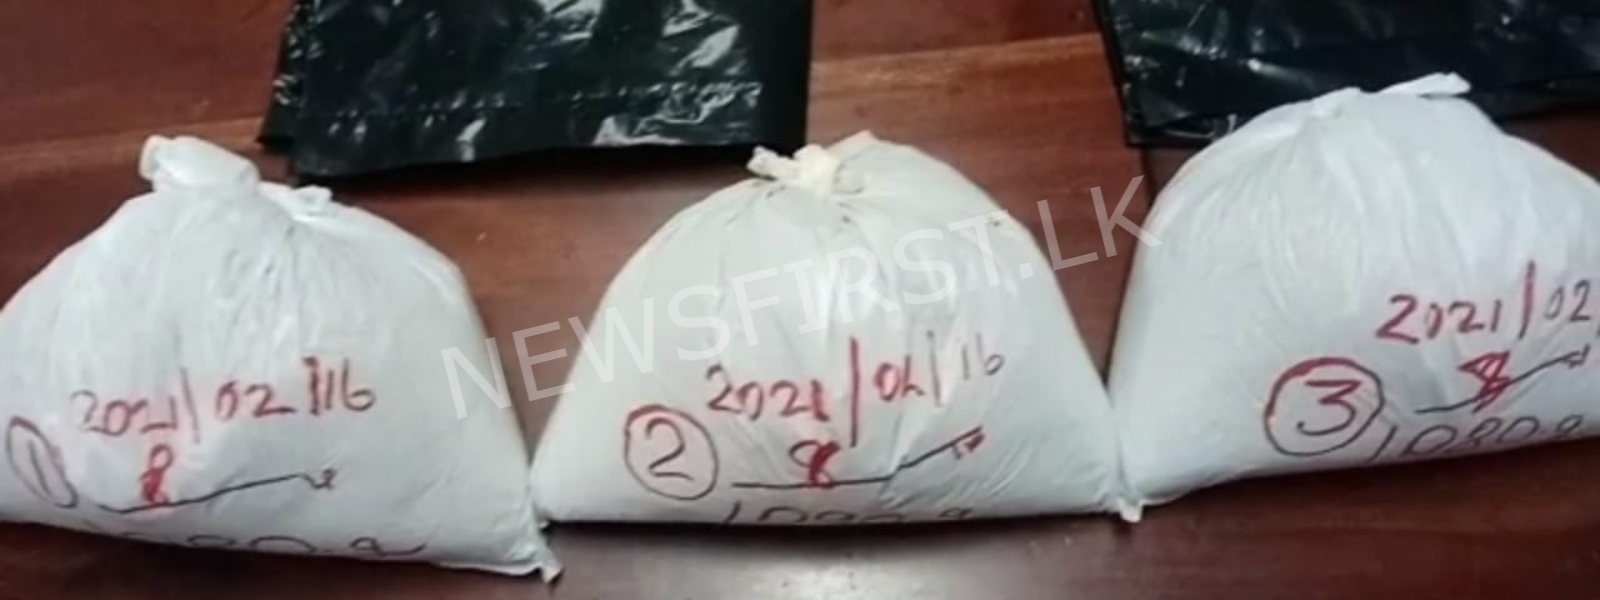 Suspect arrested in Piliyandala with Heroin